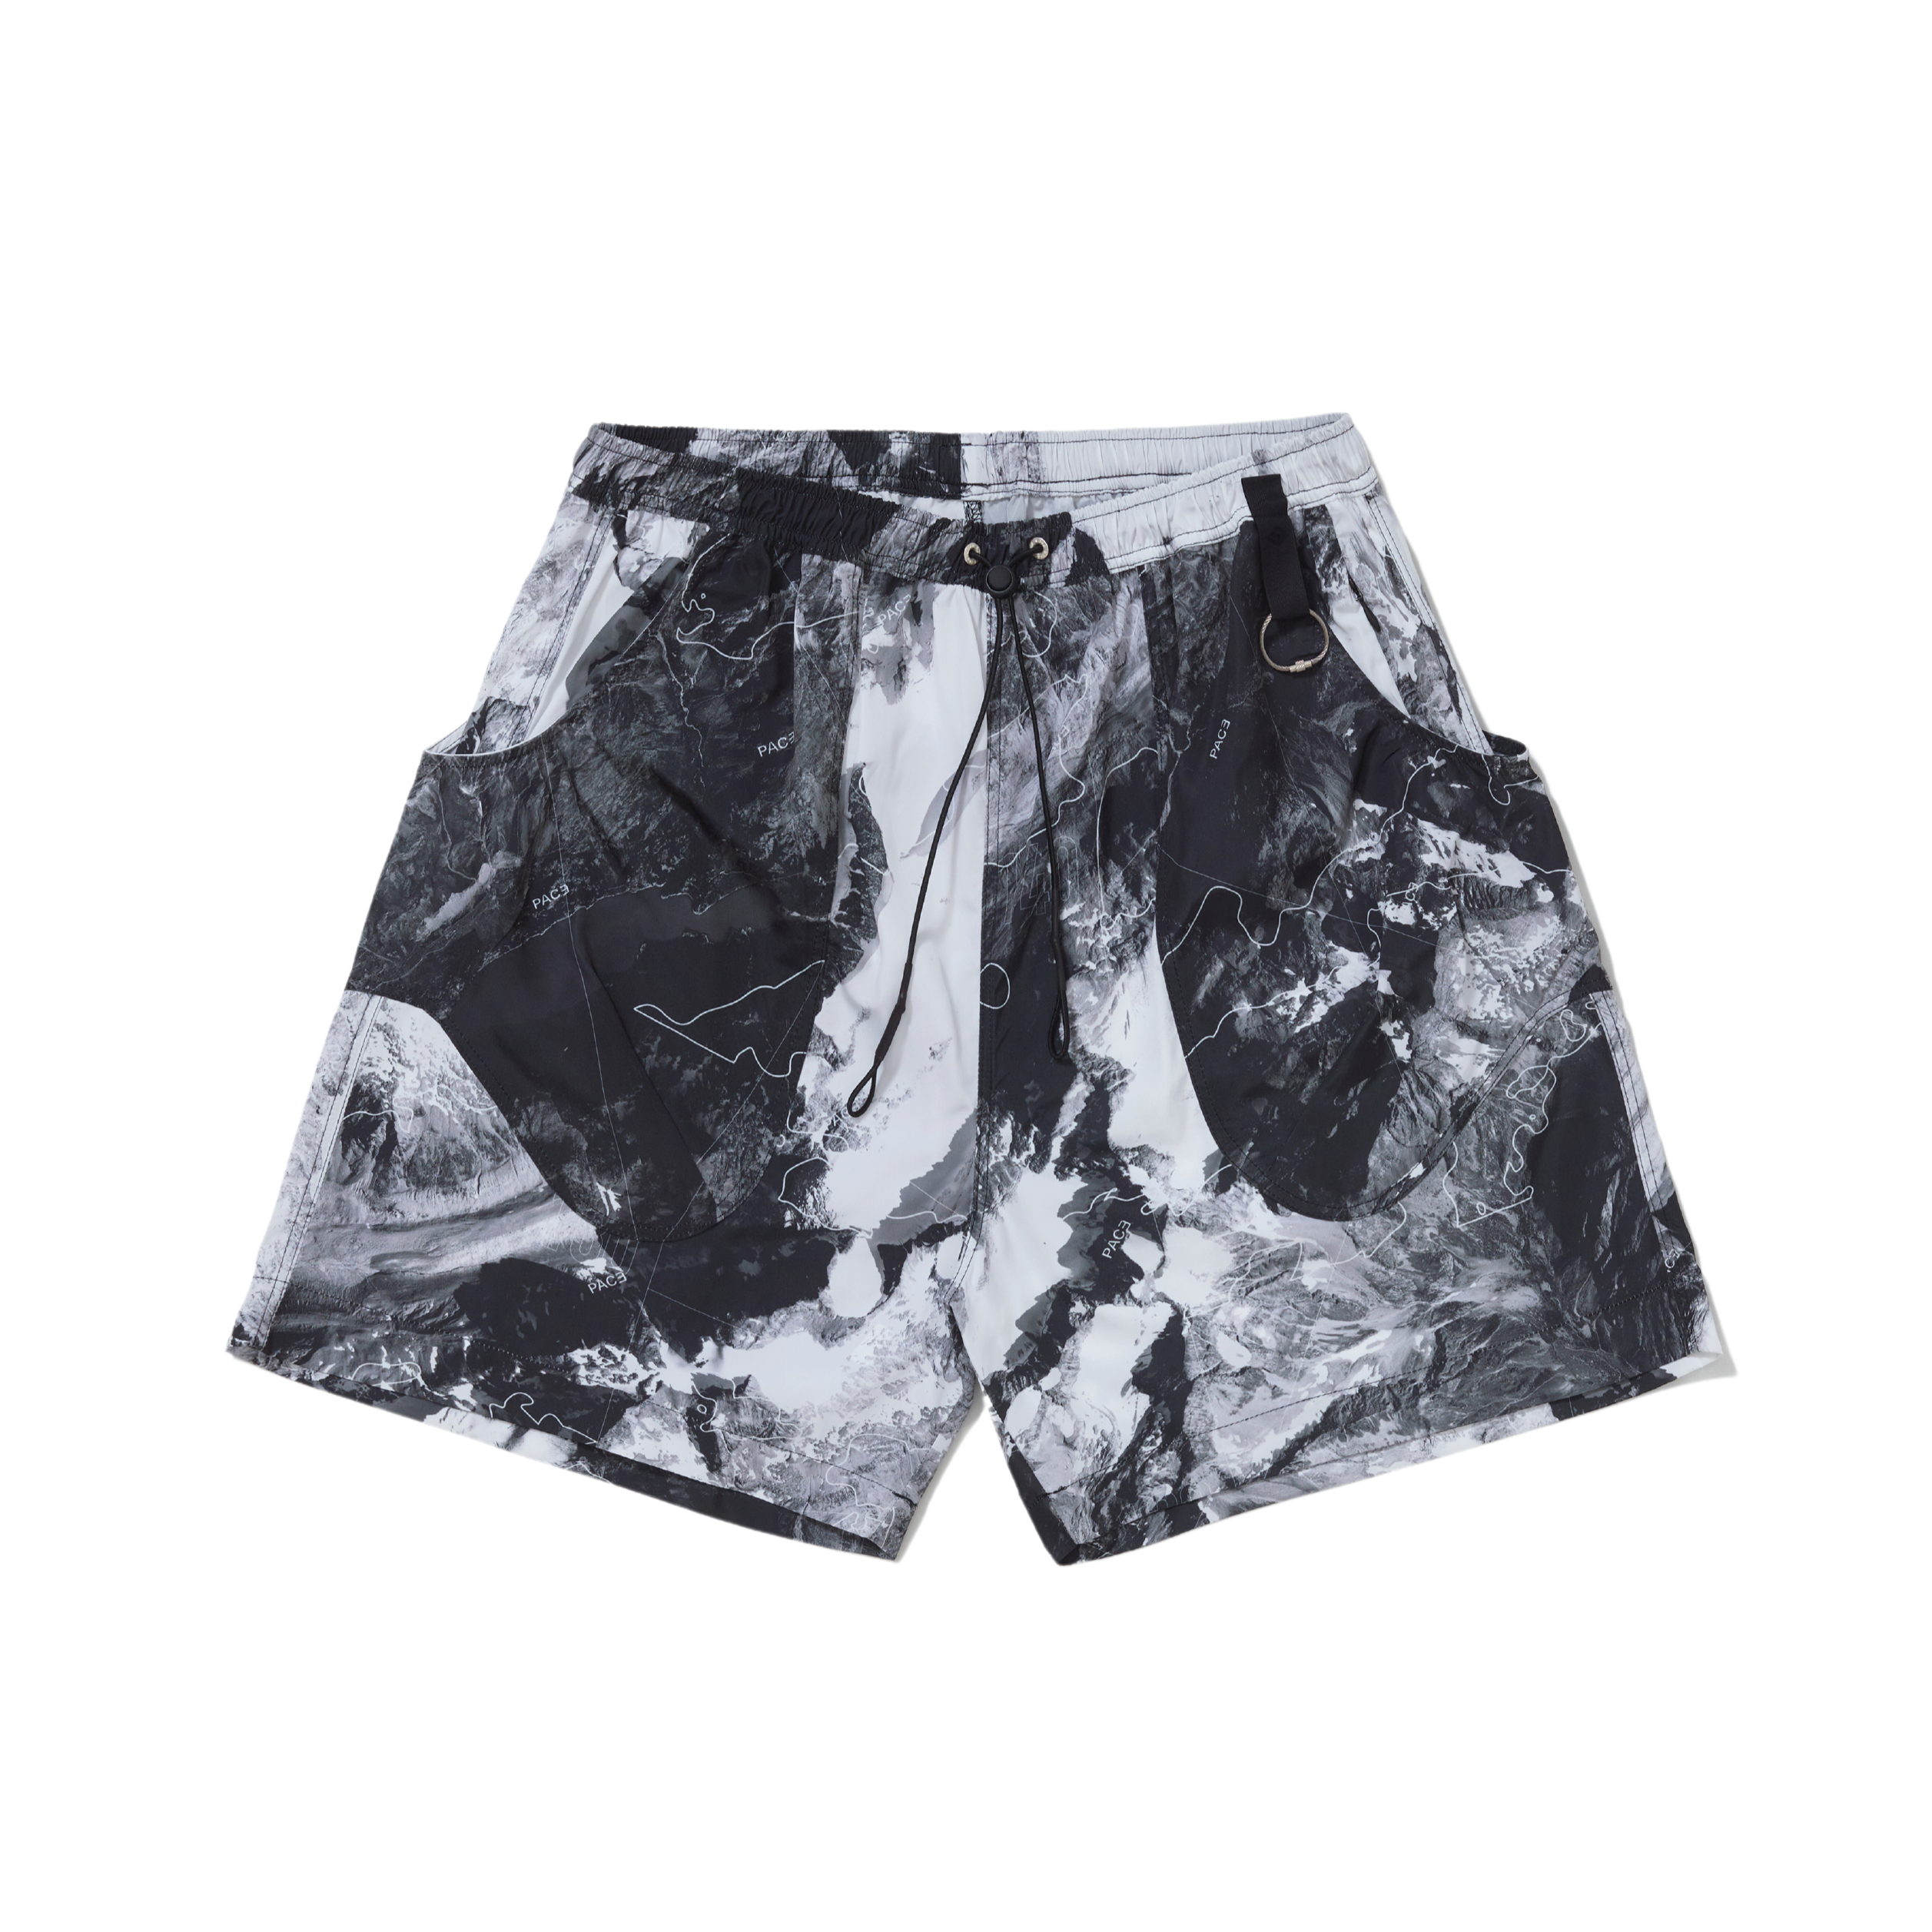 PACE - Tactical Shorts "Swiss Alps" - THE GAME